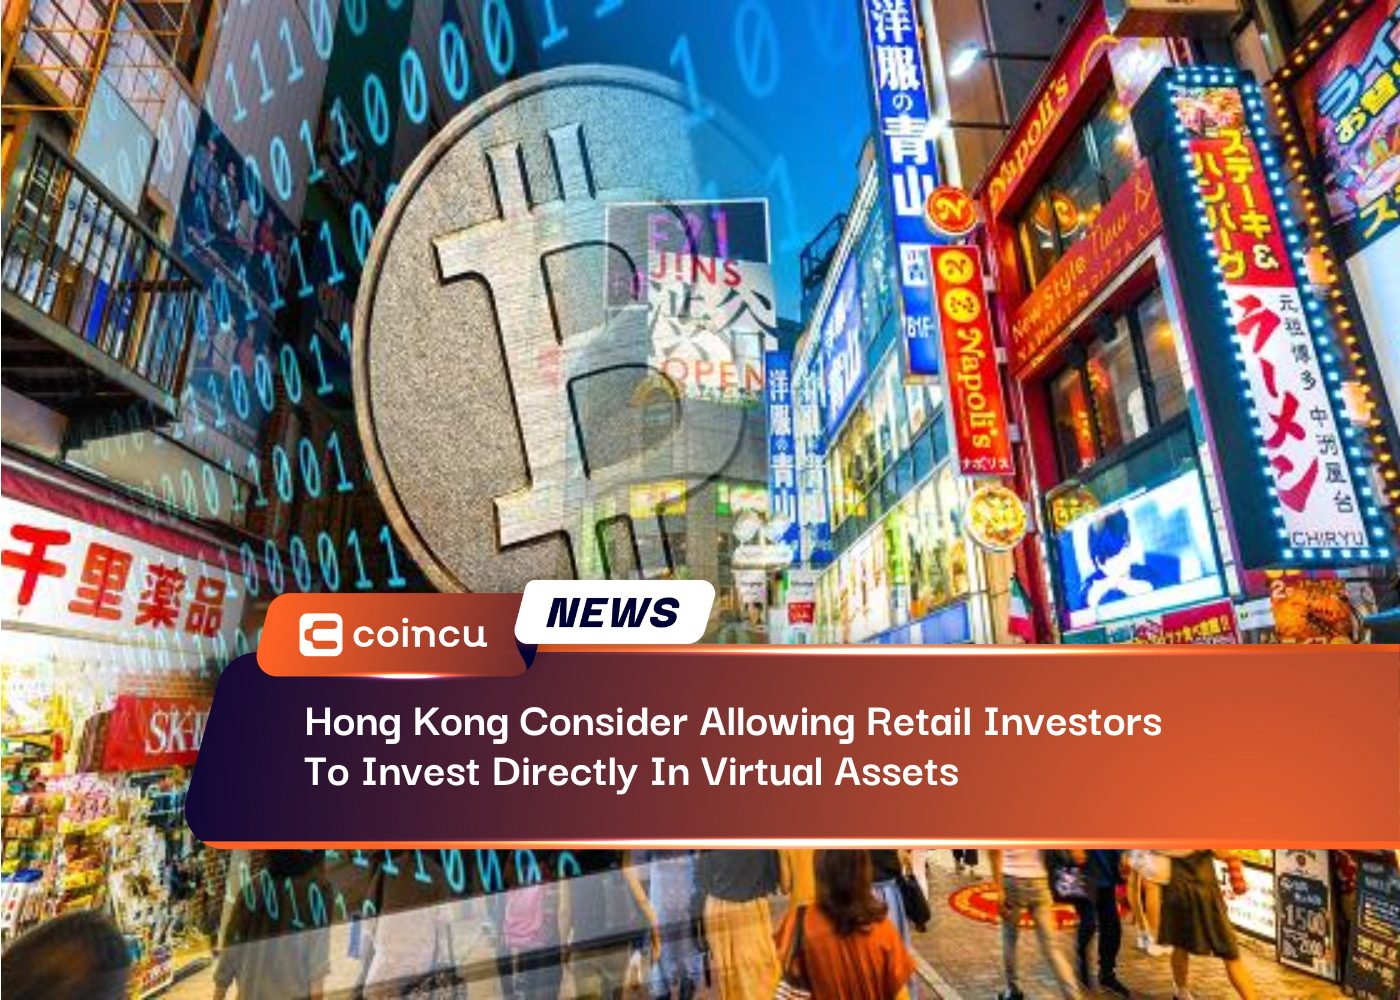 Hong Kong Consider Allowing Retail Investors To Invest Directly In Virtual Assets